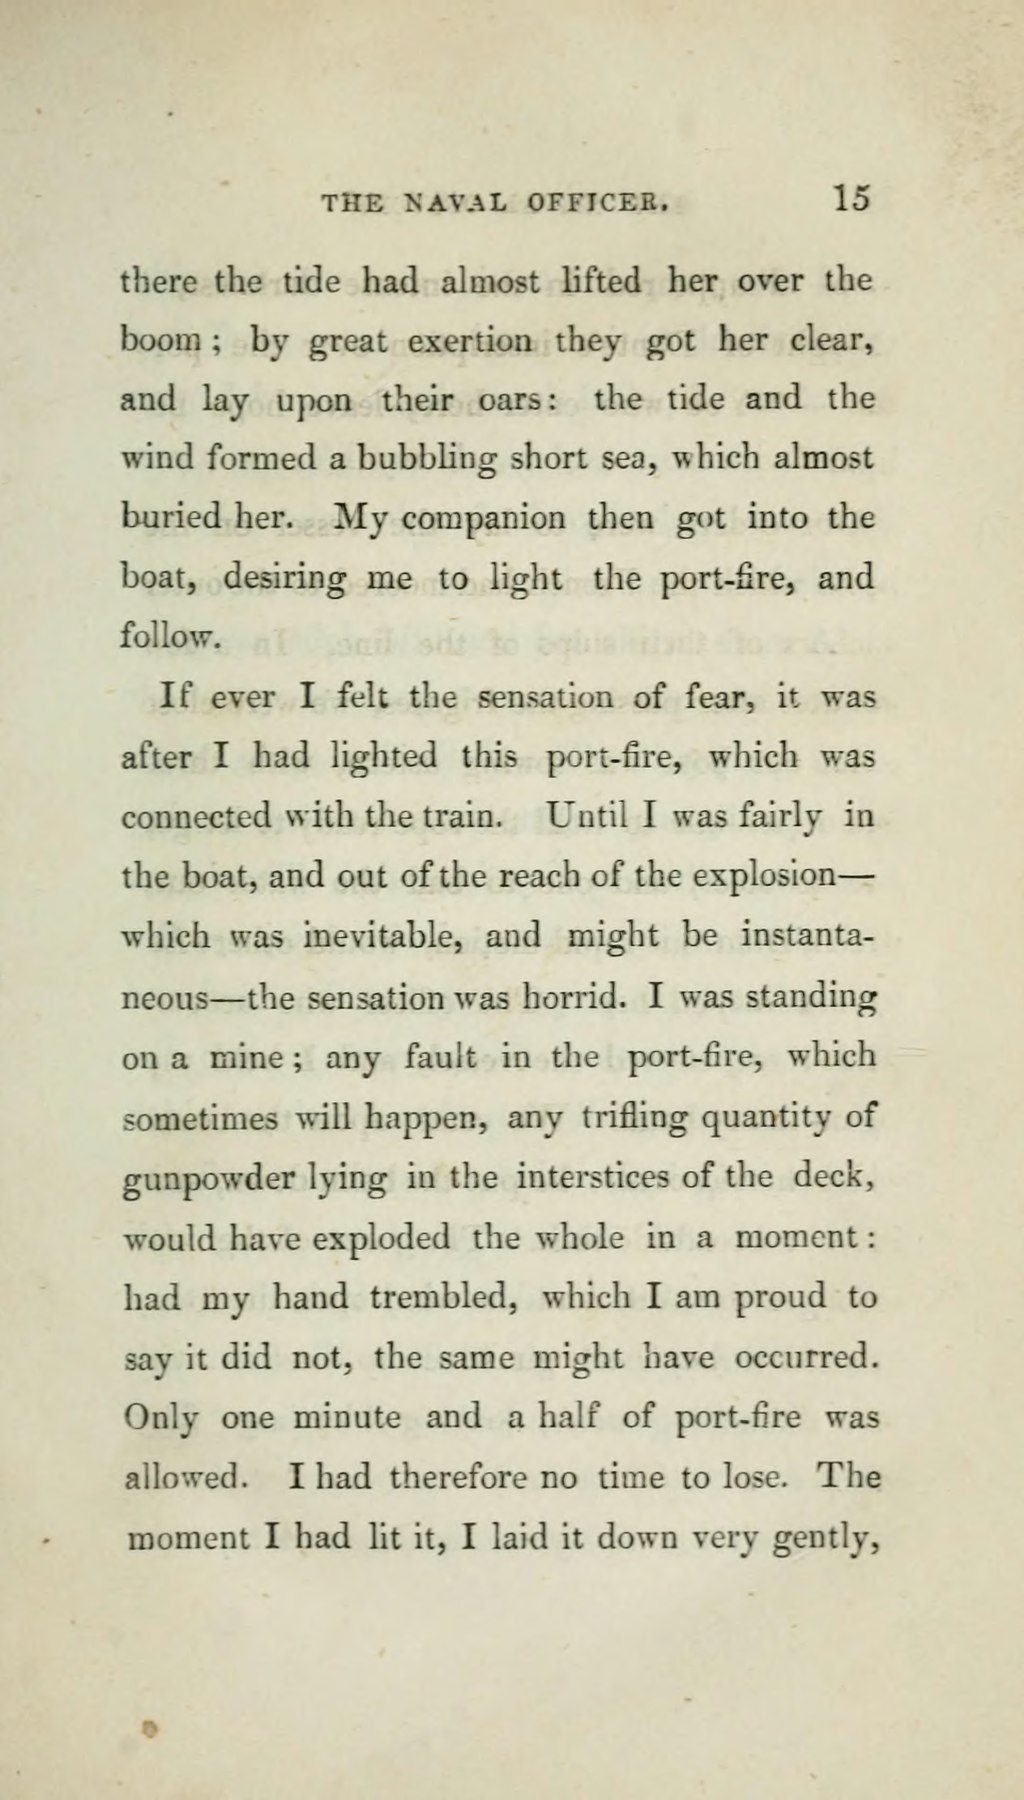 page-the-naval-officer-1829-vol-2-djvu-21-wikisource-the-free-online-library